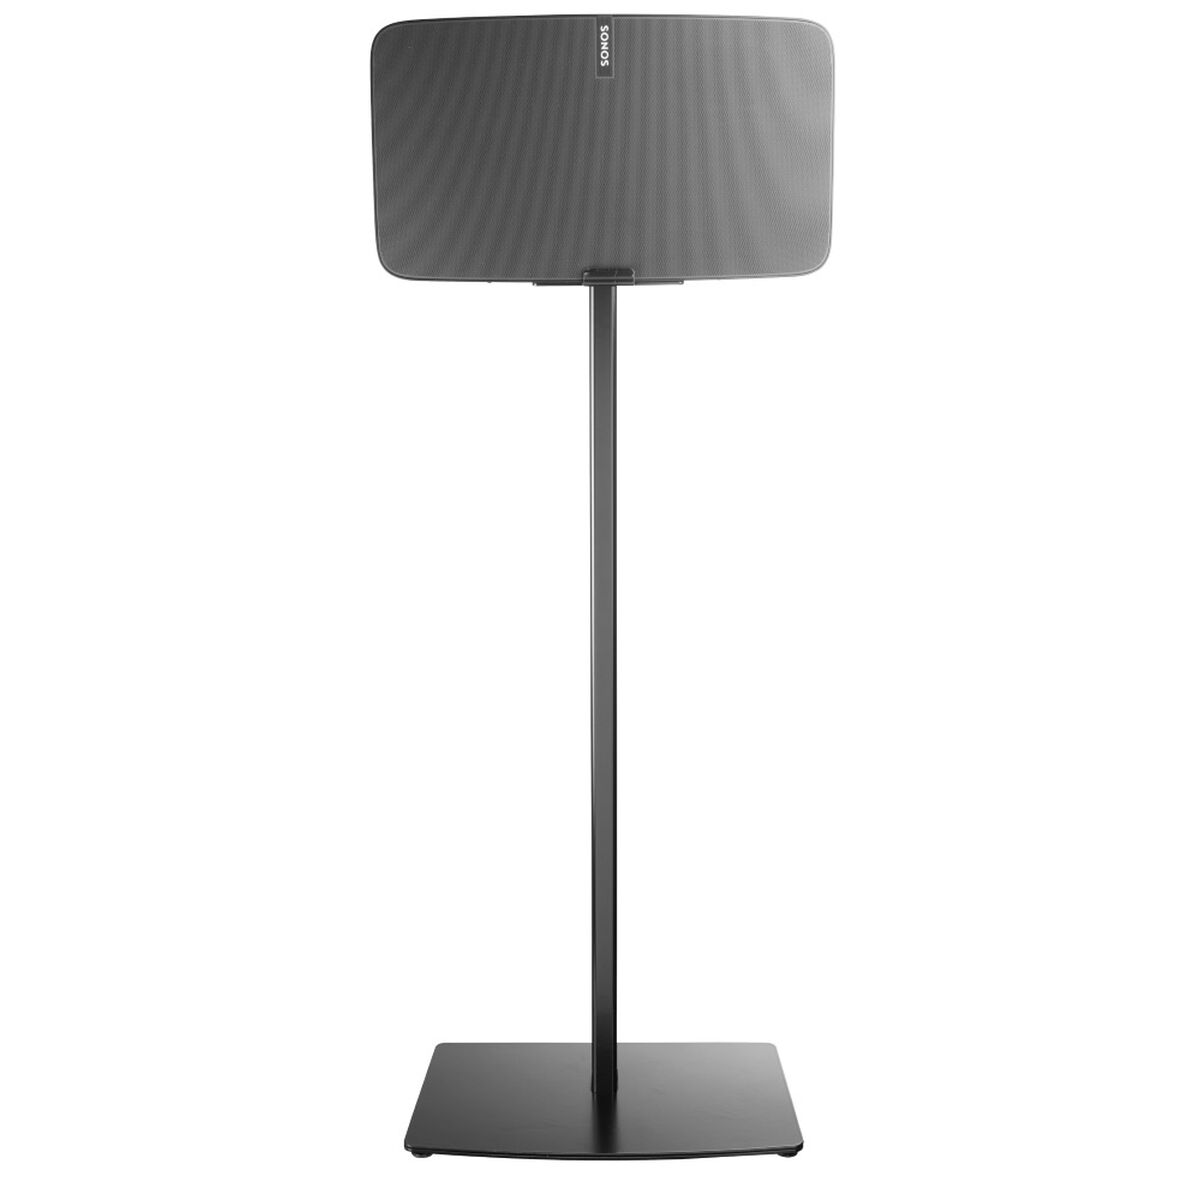 Speaker Stand Cavus Five/Play Black, Cavus, Electronics, Audio and Hi-Fi equipment, speaker-stand-cavus-five-play-black-1, Brand_Cavus, category-reference-2609, category-reference-2637, category-reference-2882, category-reference-t-19653, category-reference-t-19899, category-reference-t-21329, category-reference-t-25554, category-reference-t-7441, cinema and television, Condition_NEW, music, Price_100 - 200, RiotNook